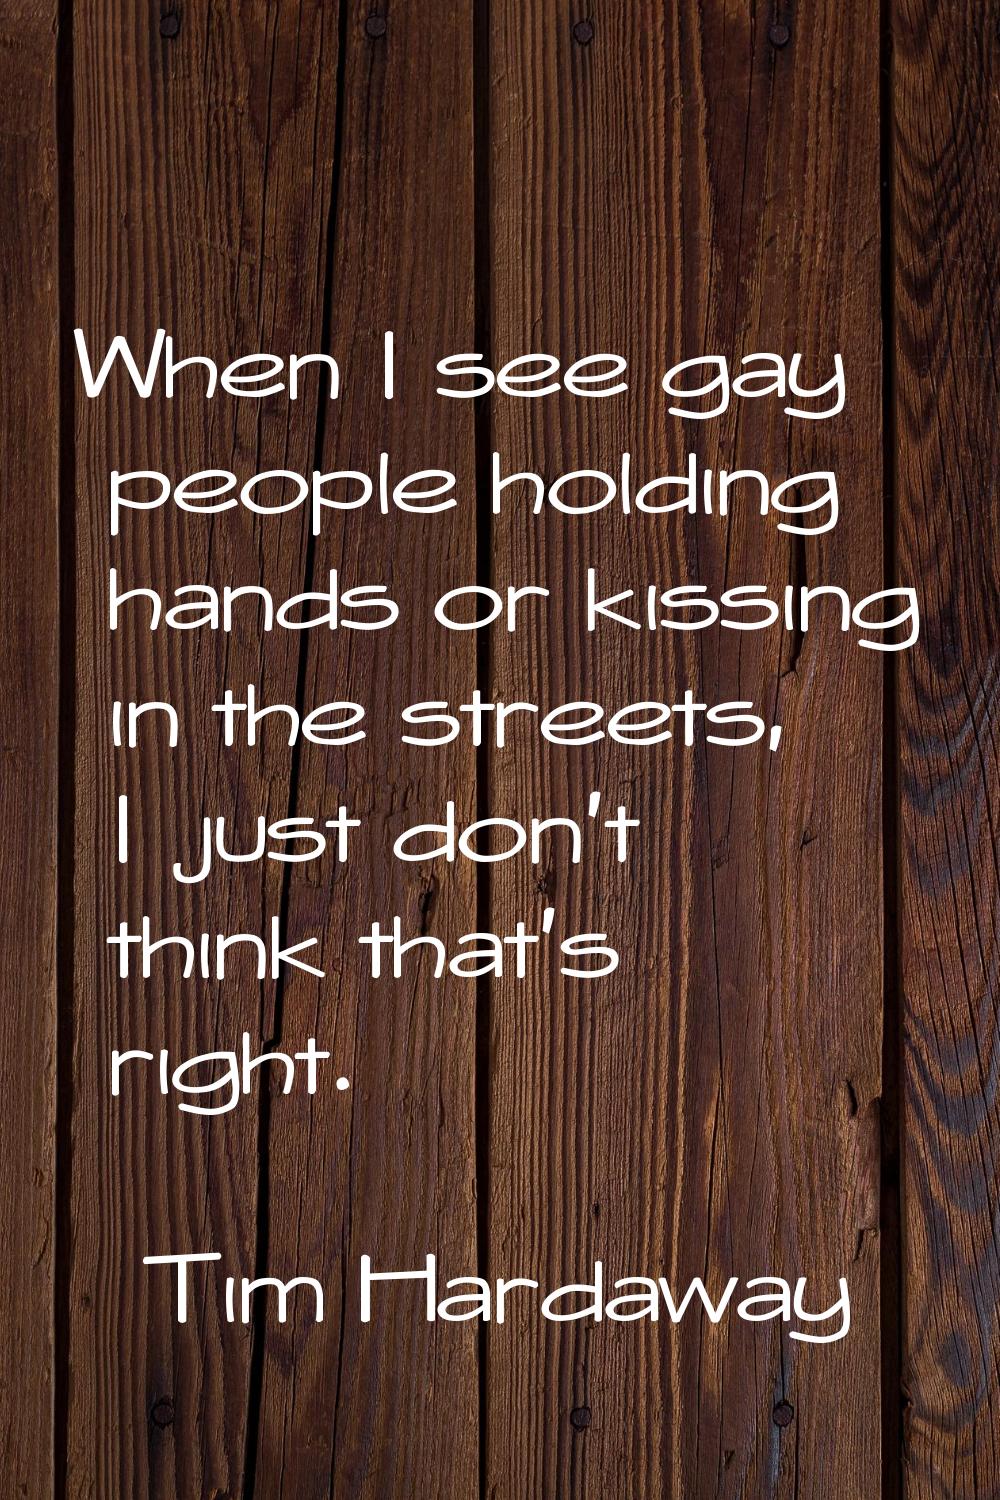 When I see gay people holding hands or kissing in the streets, I just don't think that's right.